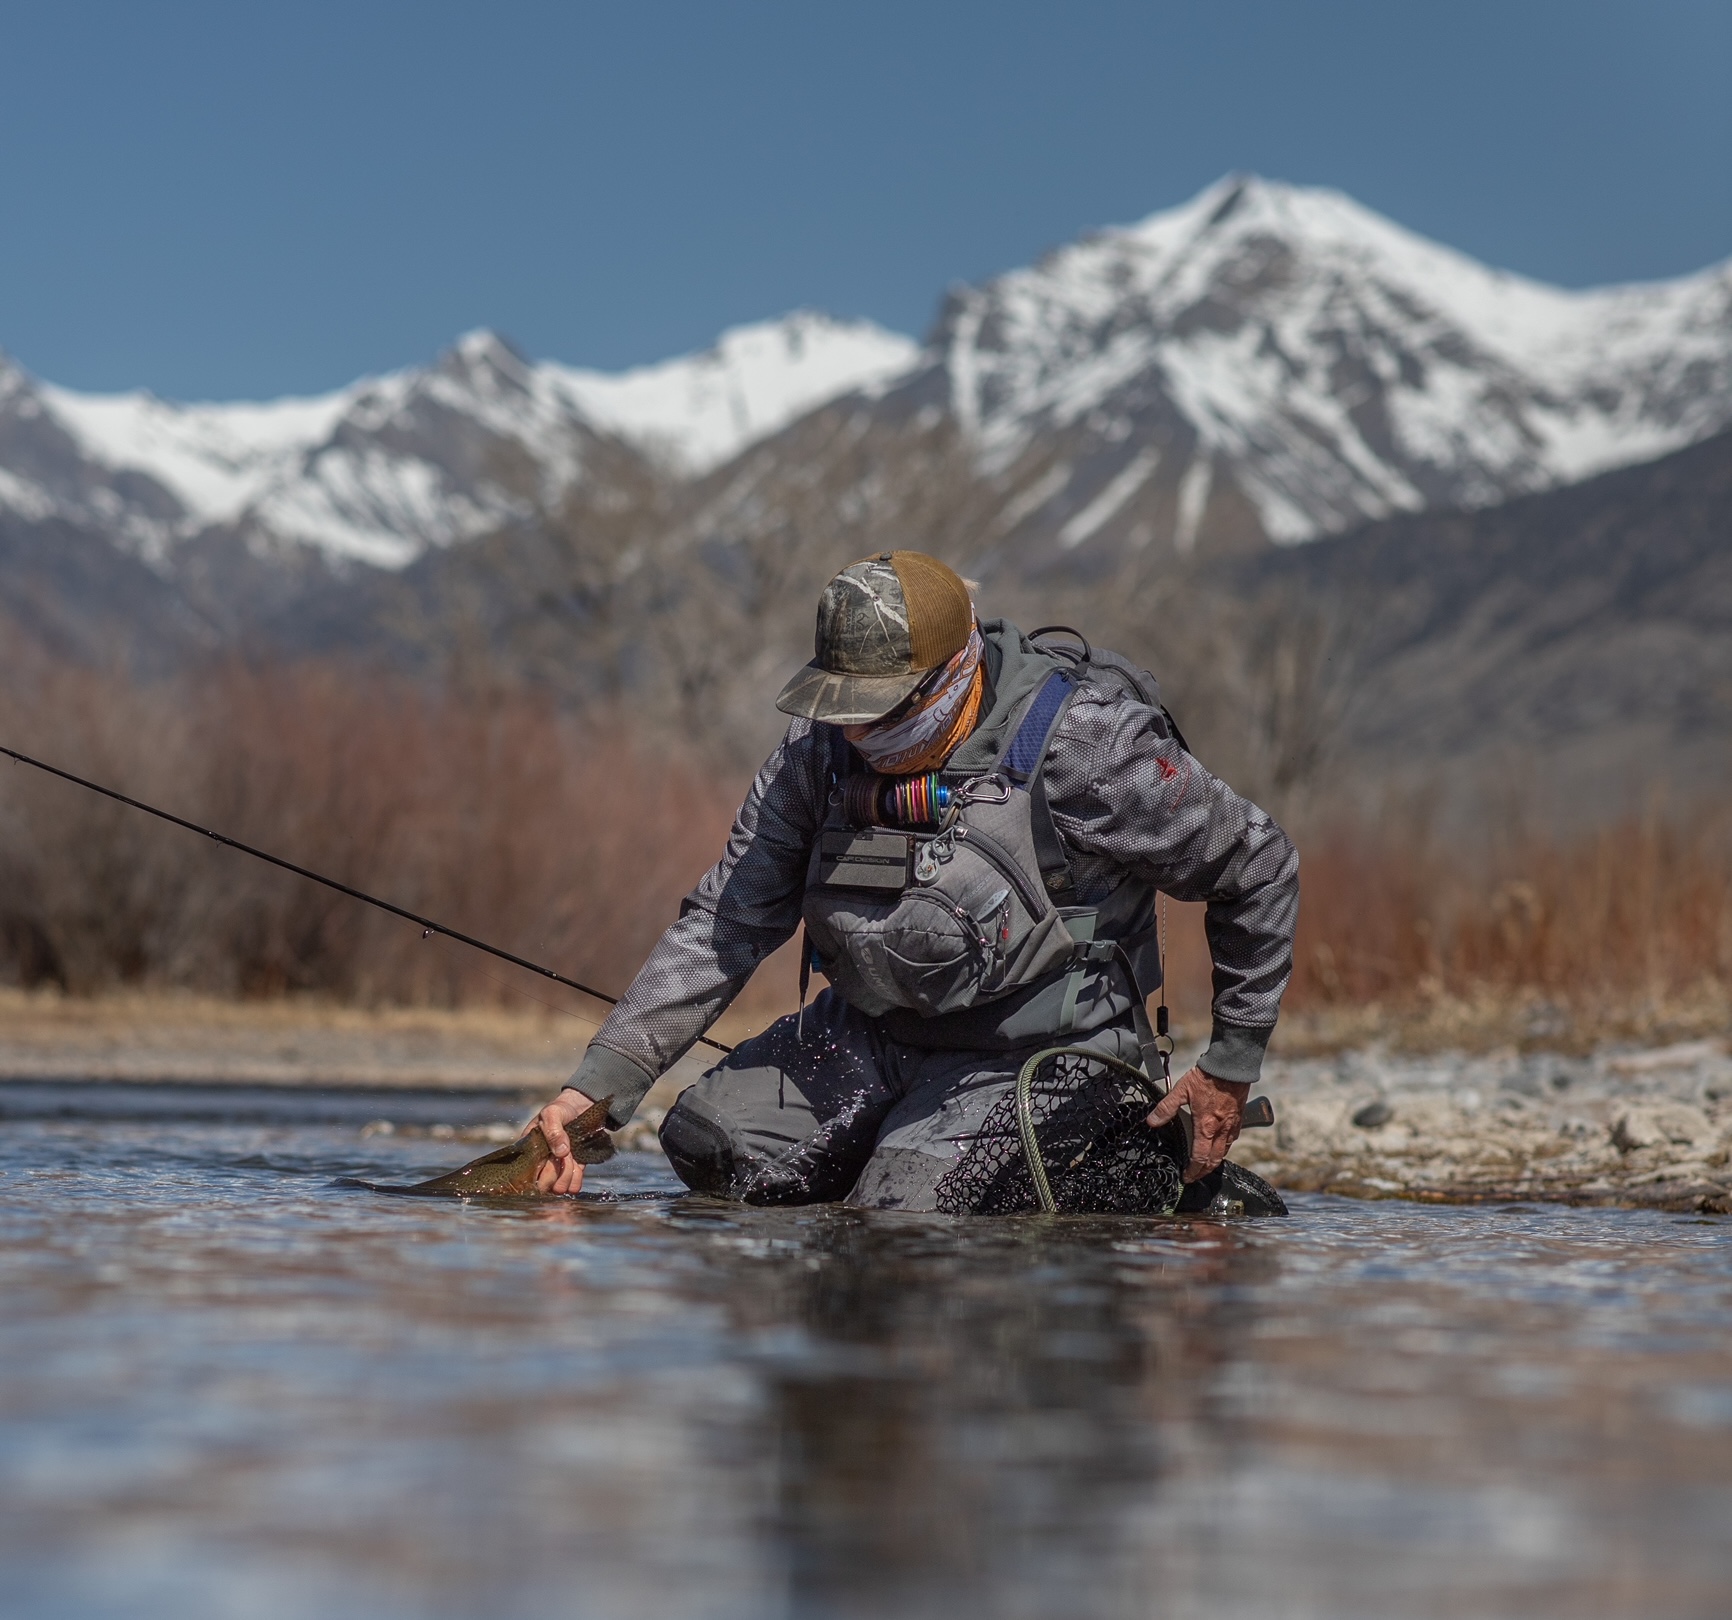 Angler fishing in the spring time with a fish in his hand. Snowy mountains in the background.